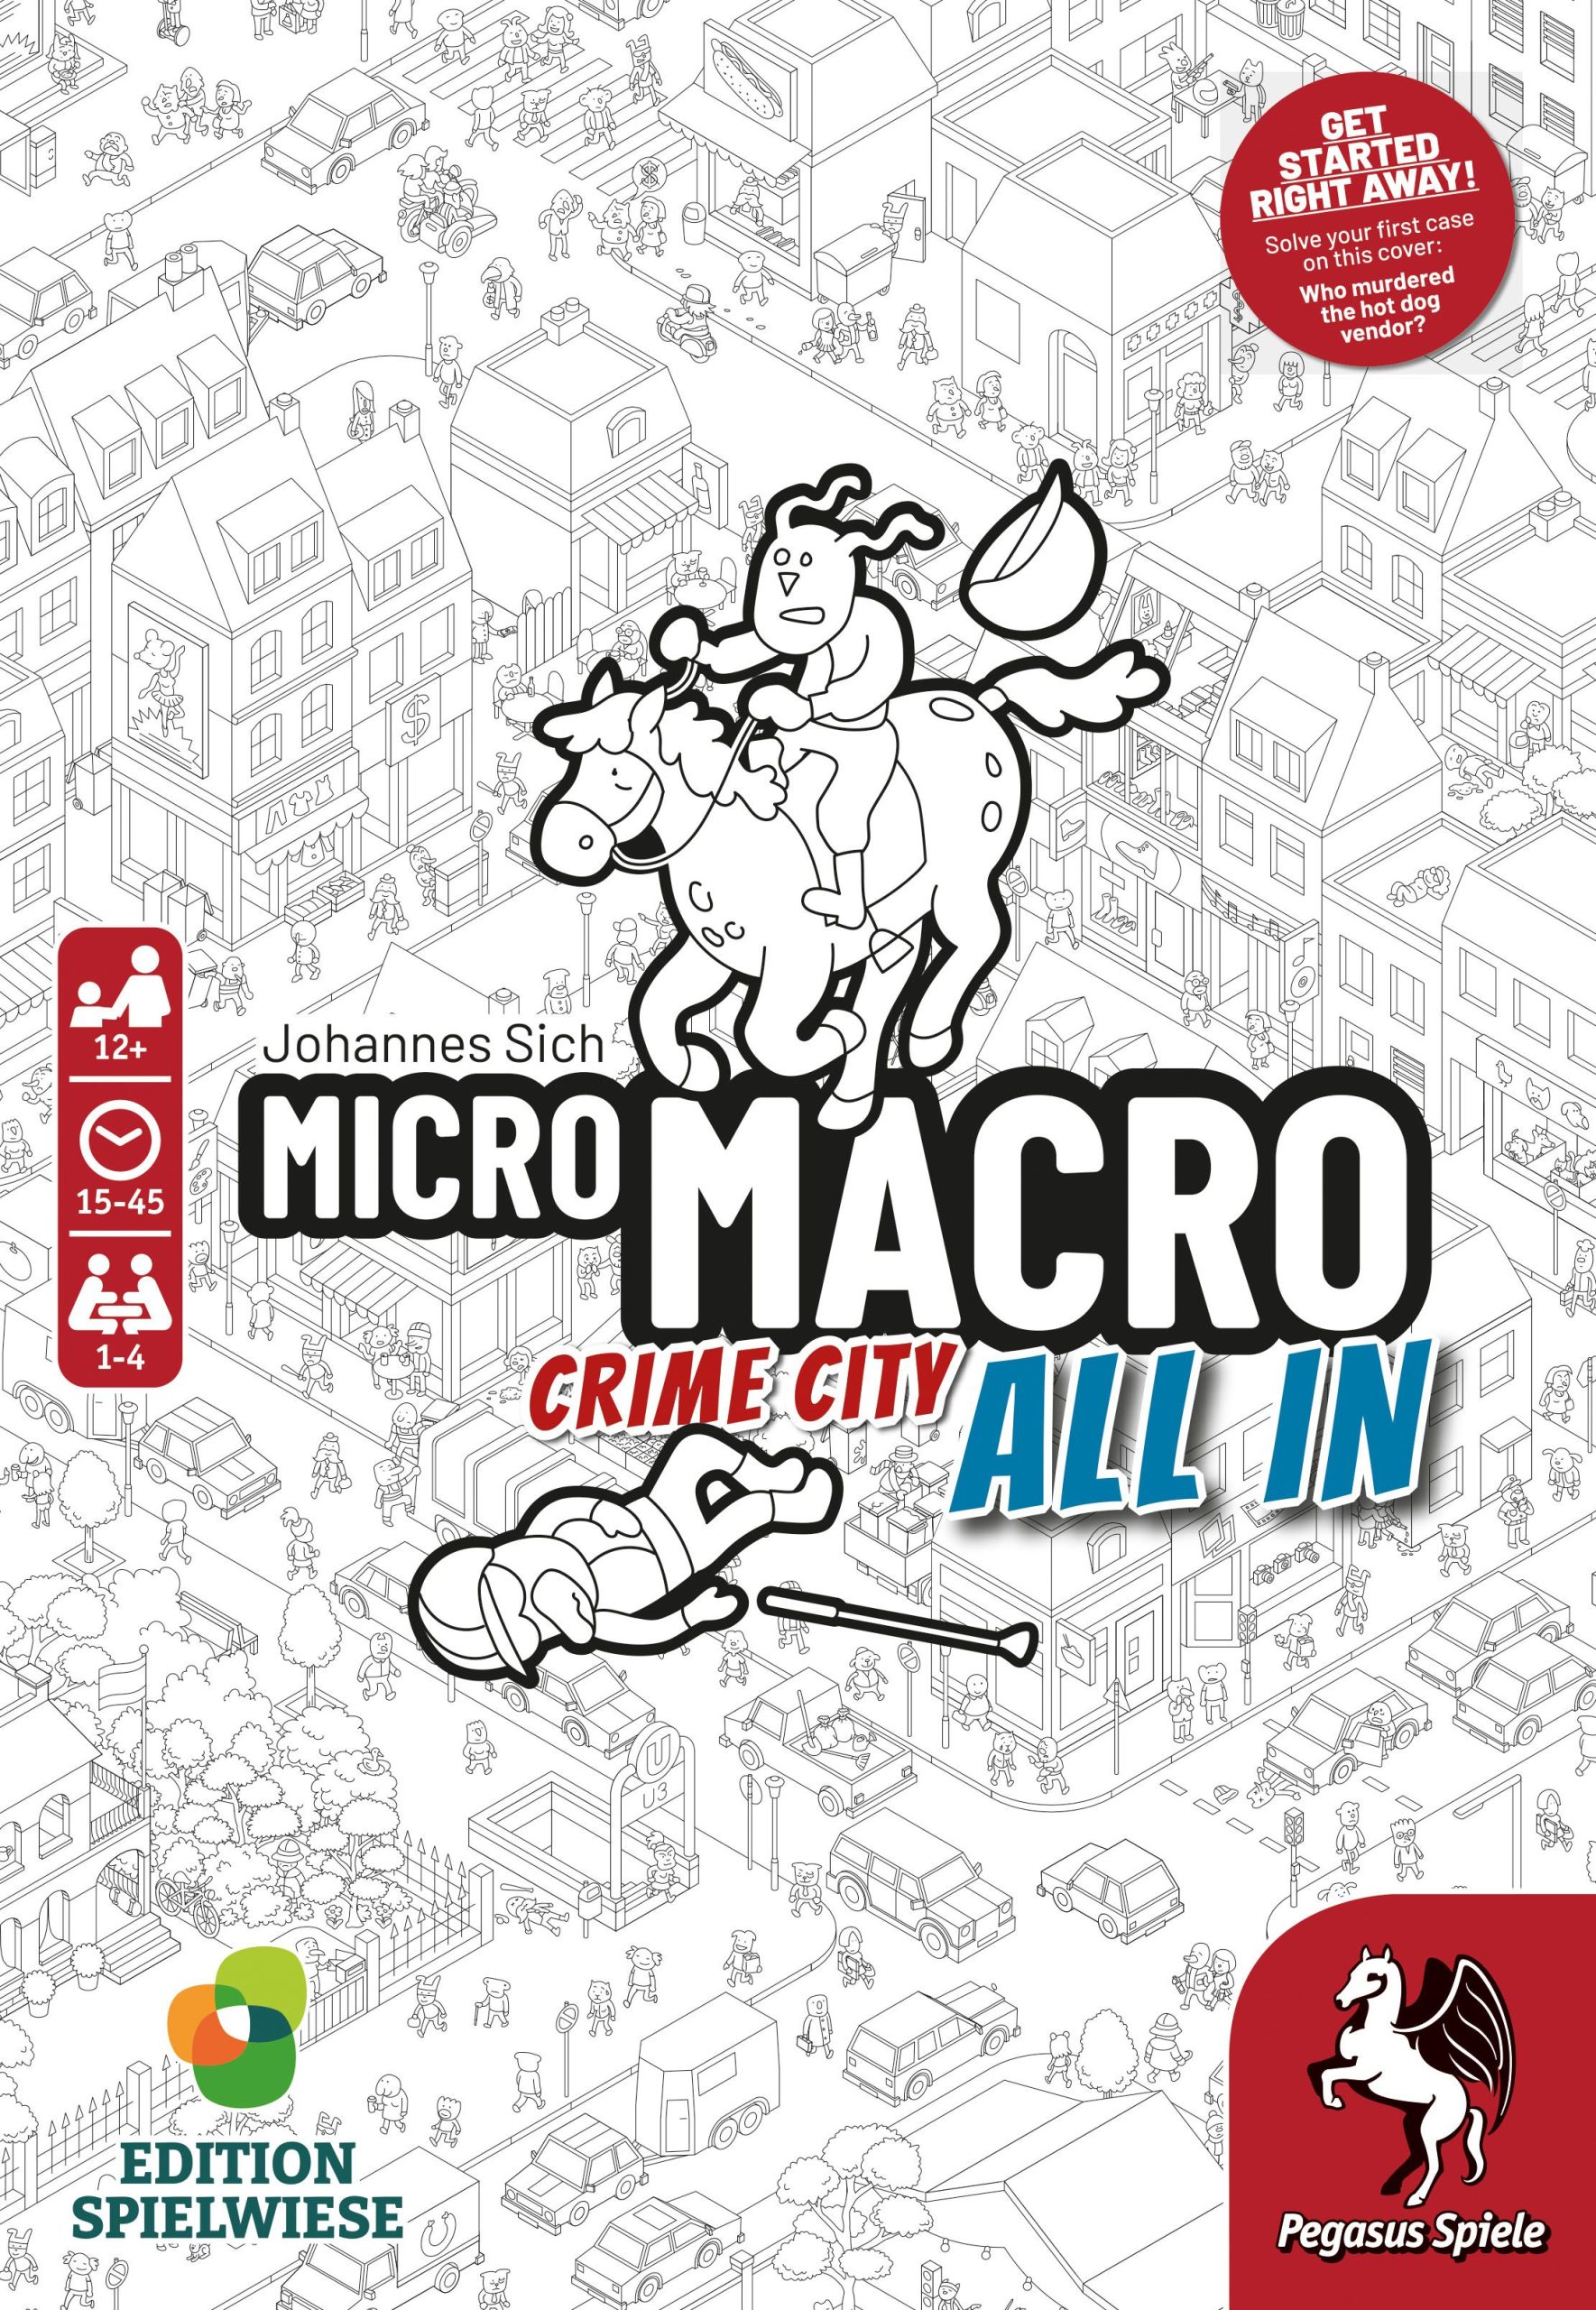 micromacro-crime-city-all-in-668179492ae7133bfc5a08f165010f36